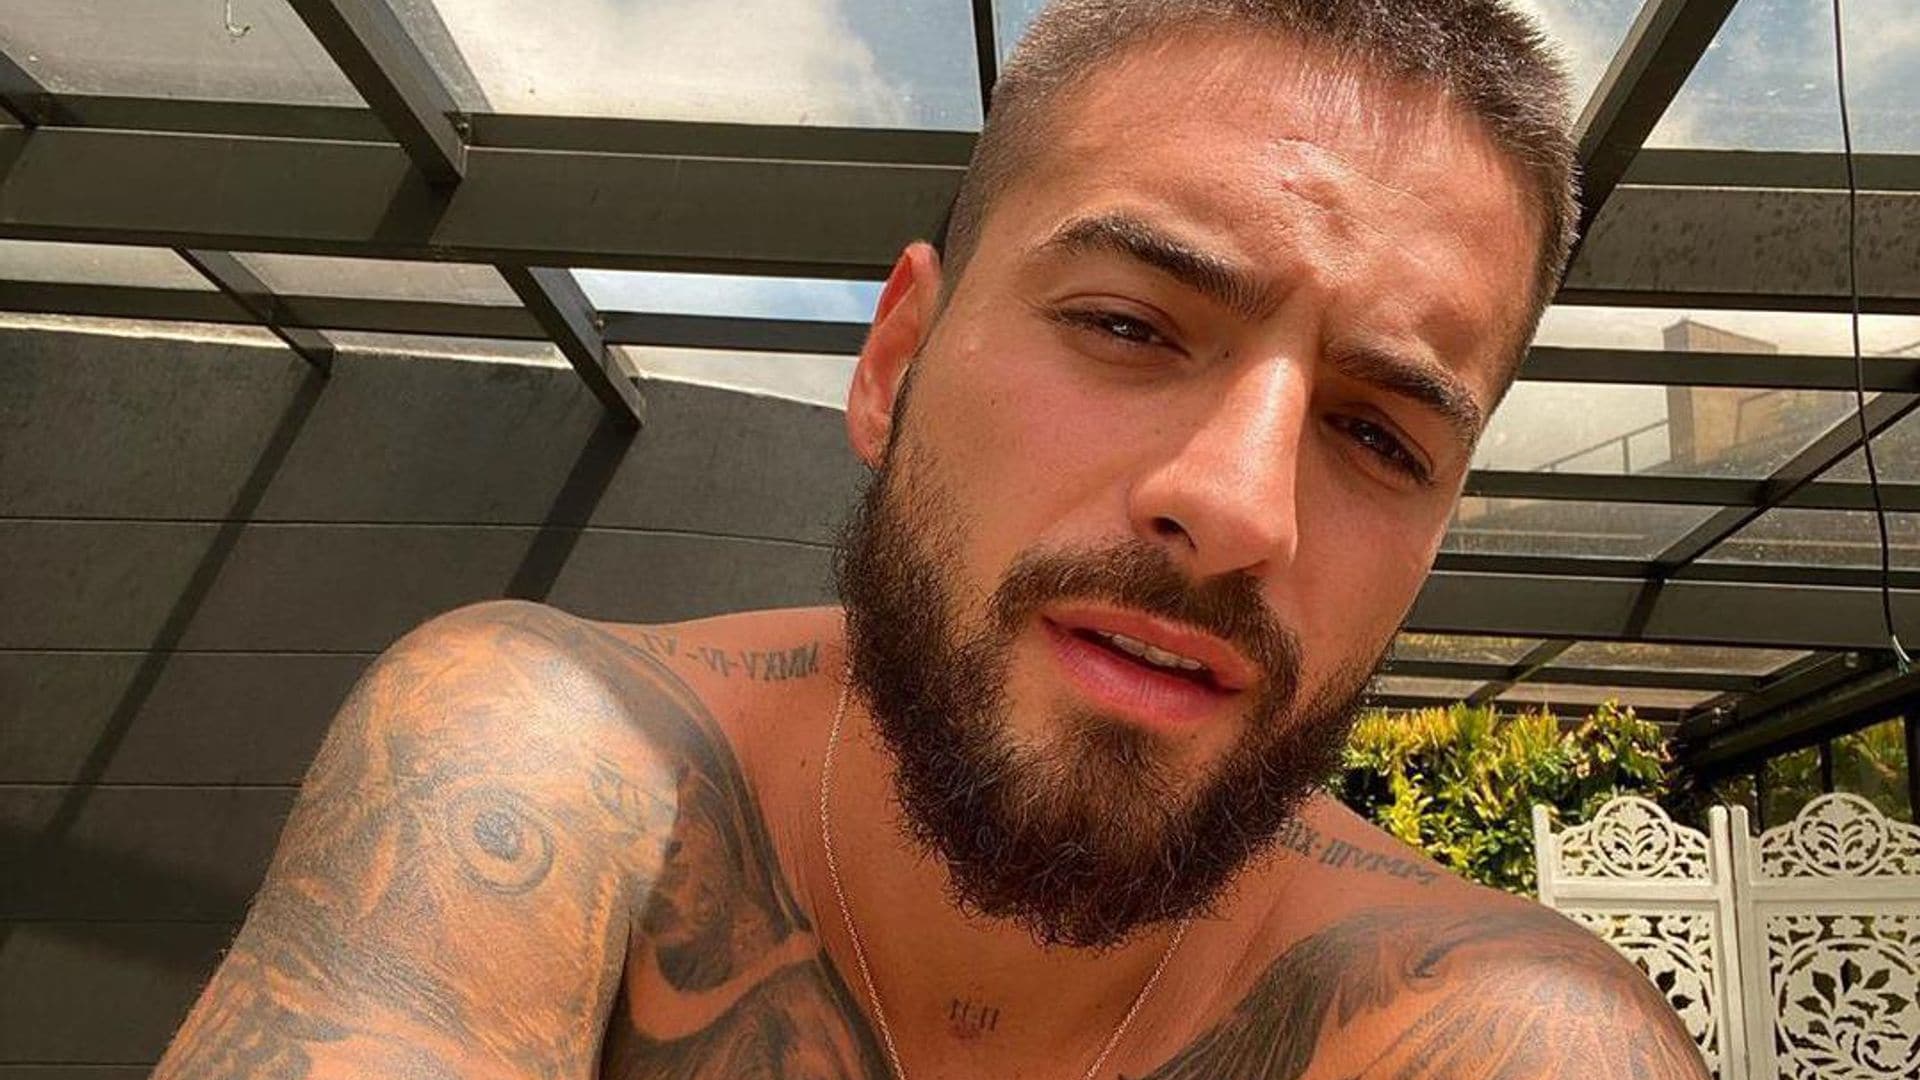 Maluma shows off impressive six-pack abs and tattoos during shirtless dance